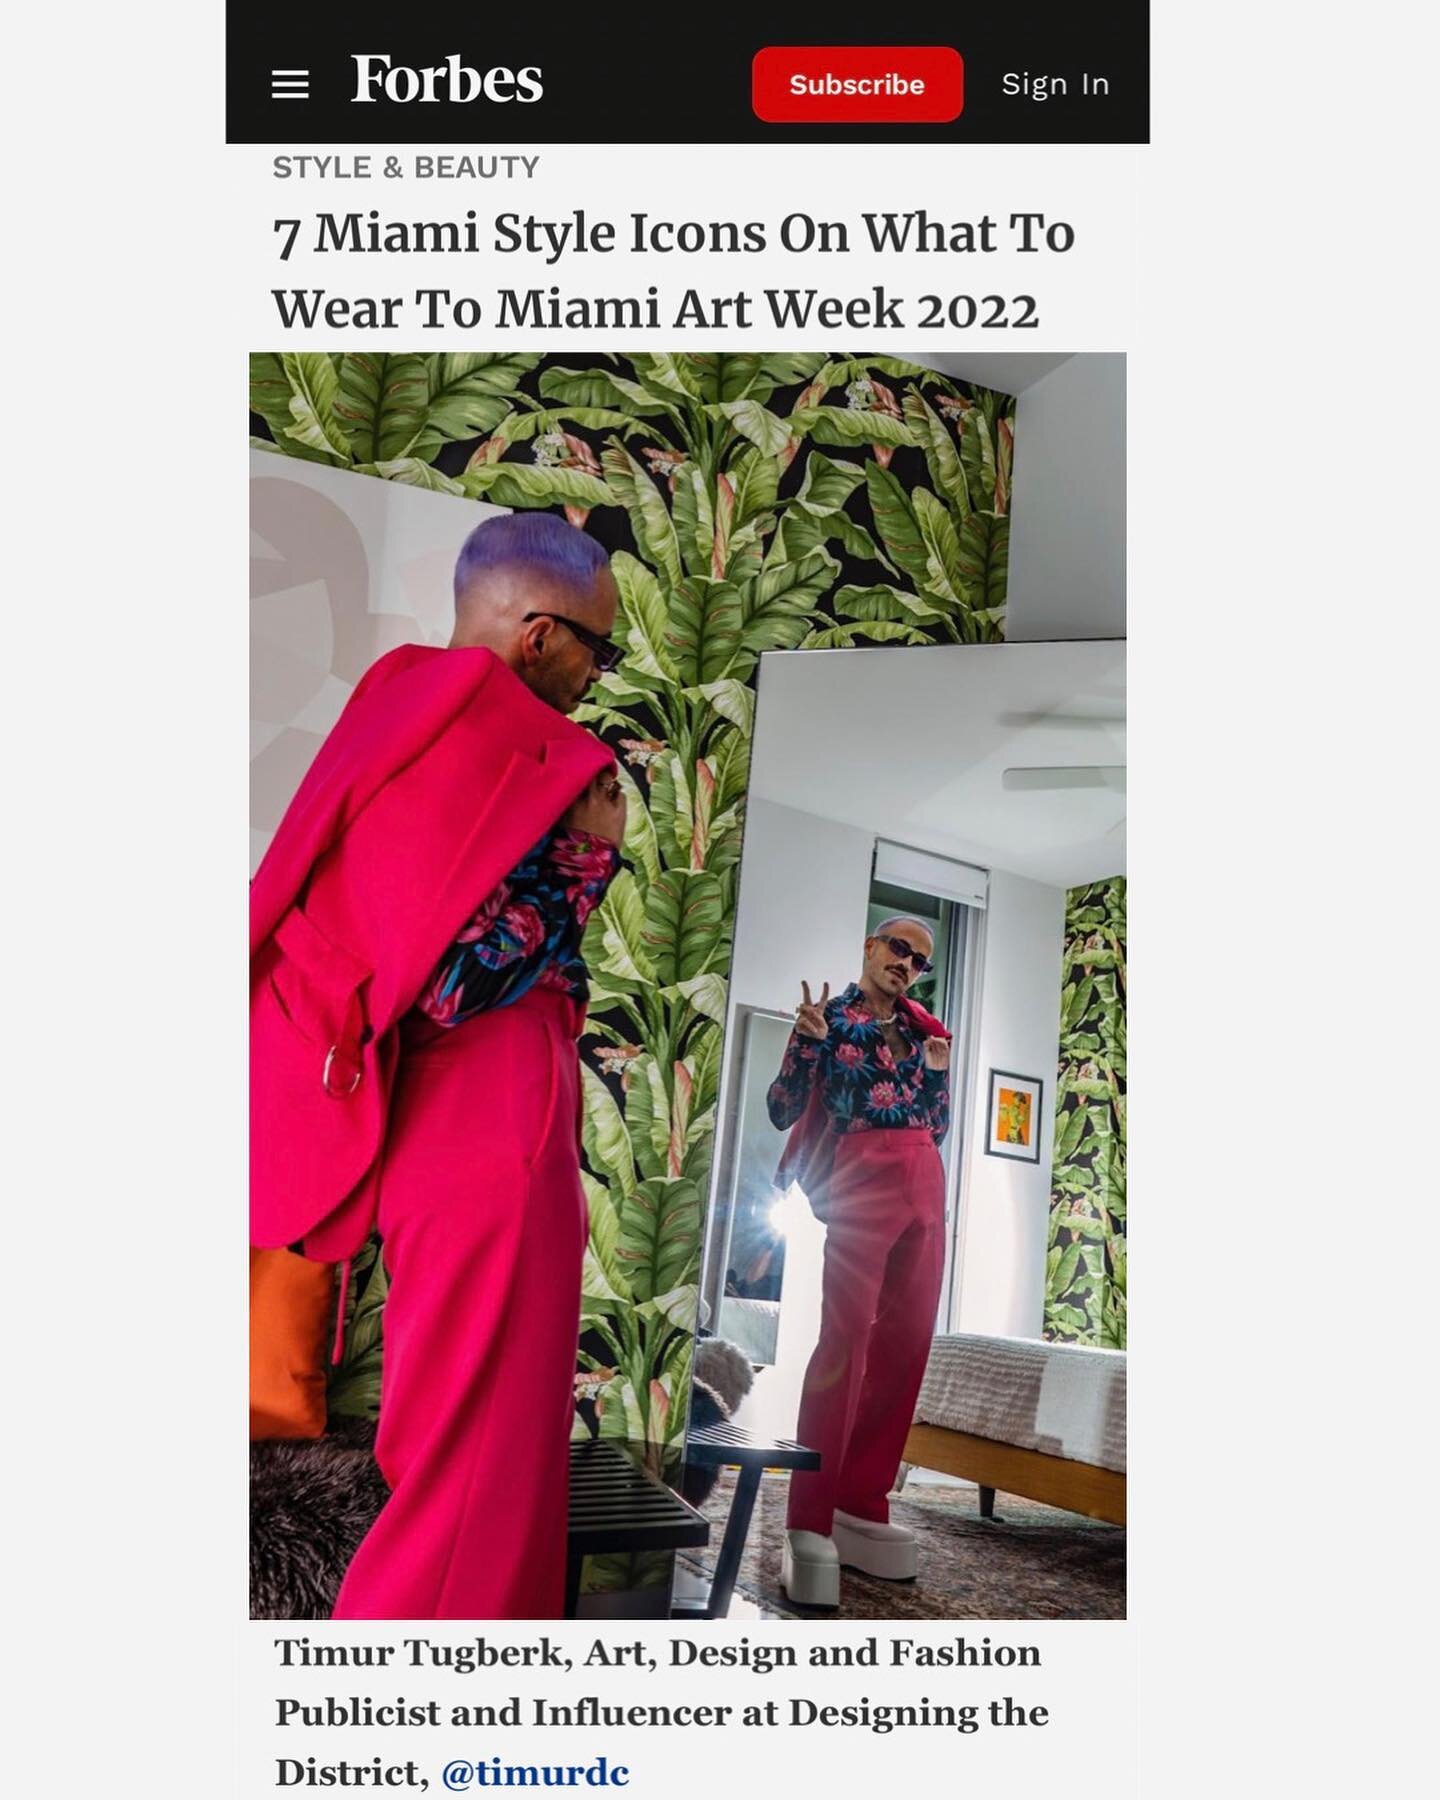 FUCKING FORBES Y&rsquo;ALL ✨

Honored to be one of the top local Miami style experts sharing what to wear, and must-pack items for #MiamiArtWeek #ArtBaselMiami.

&ldquo;The style moment of Miami Art Week this year is going to be eccentric, eclectic, 